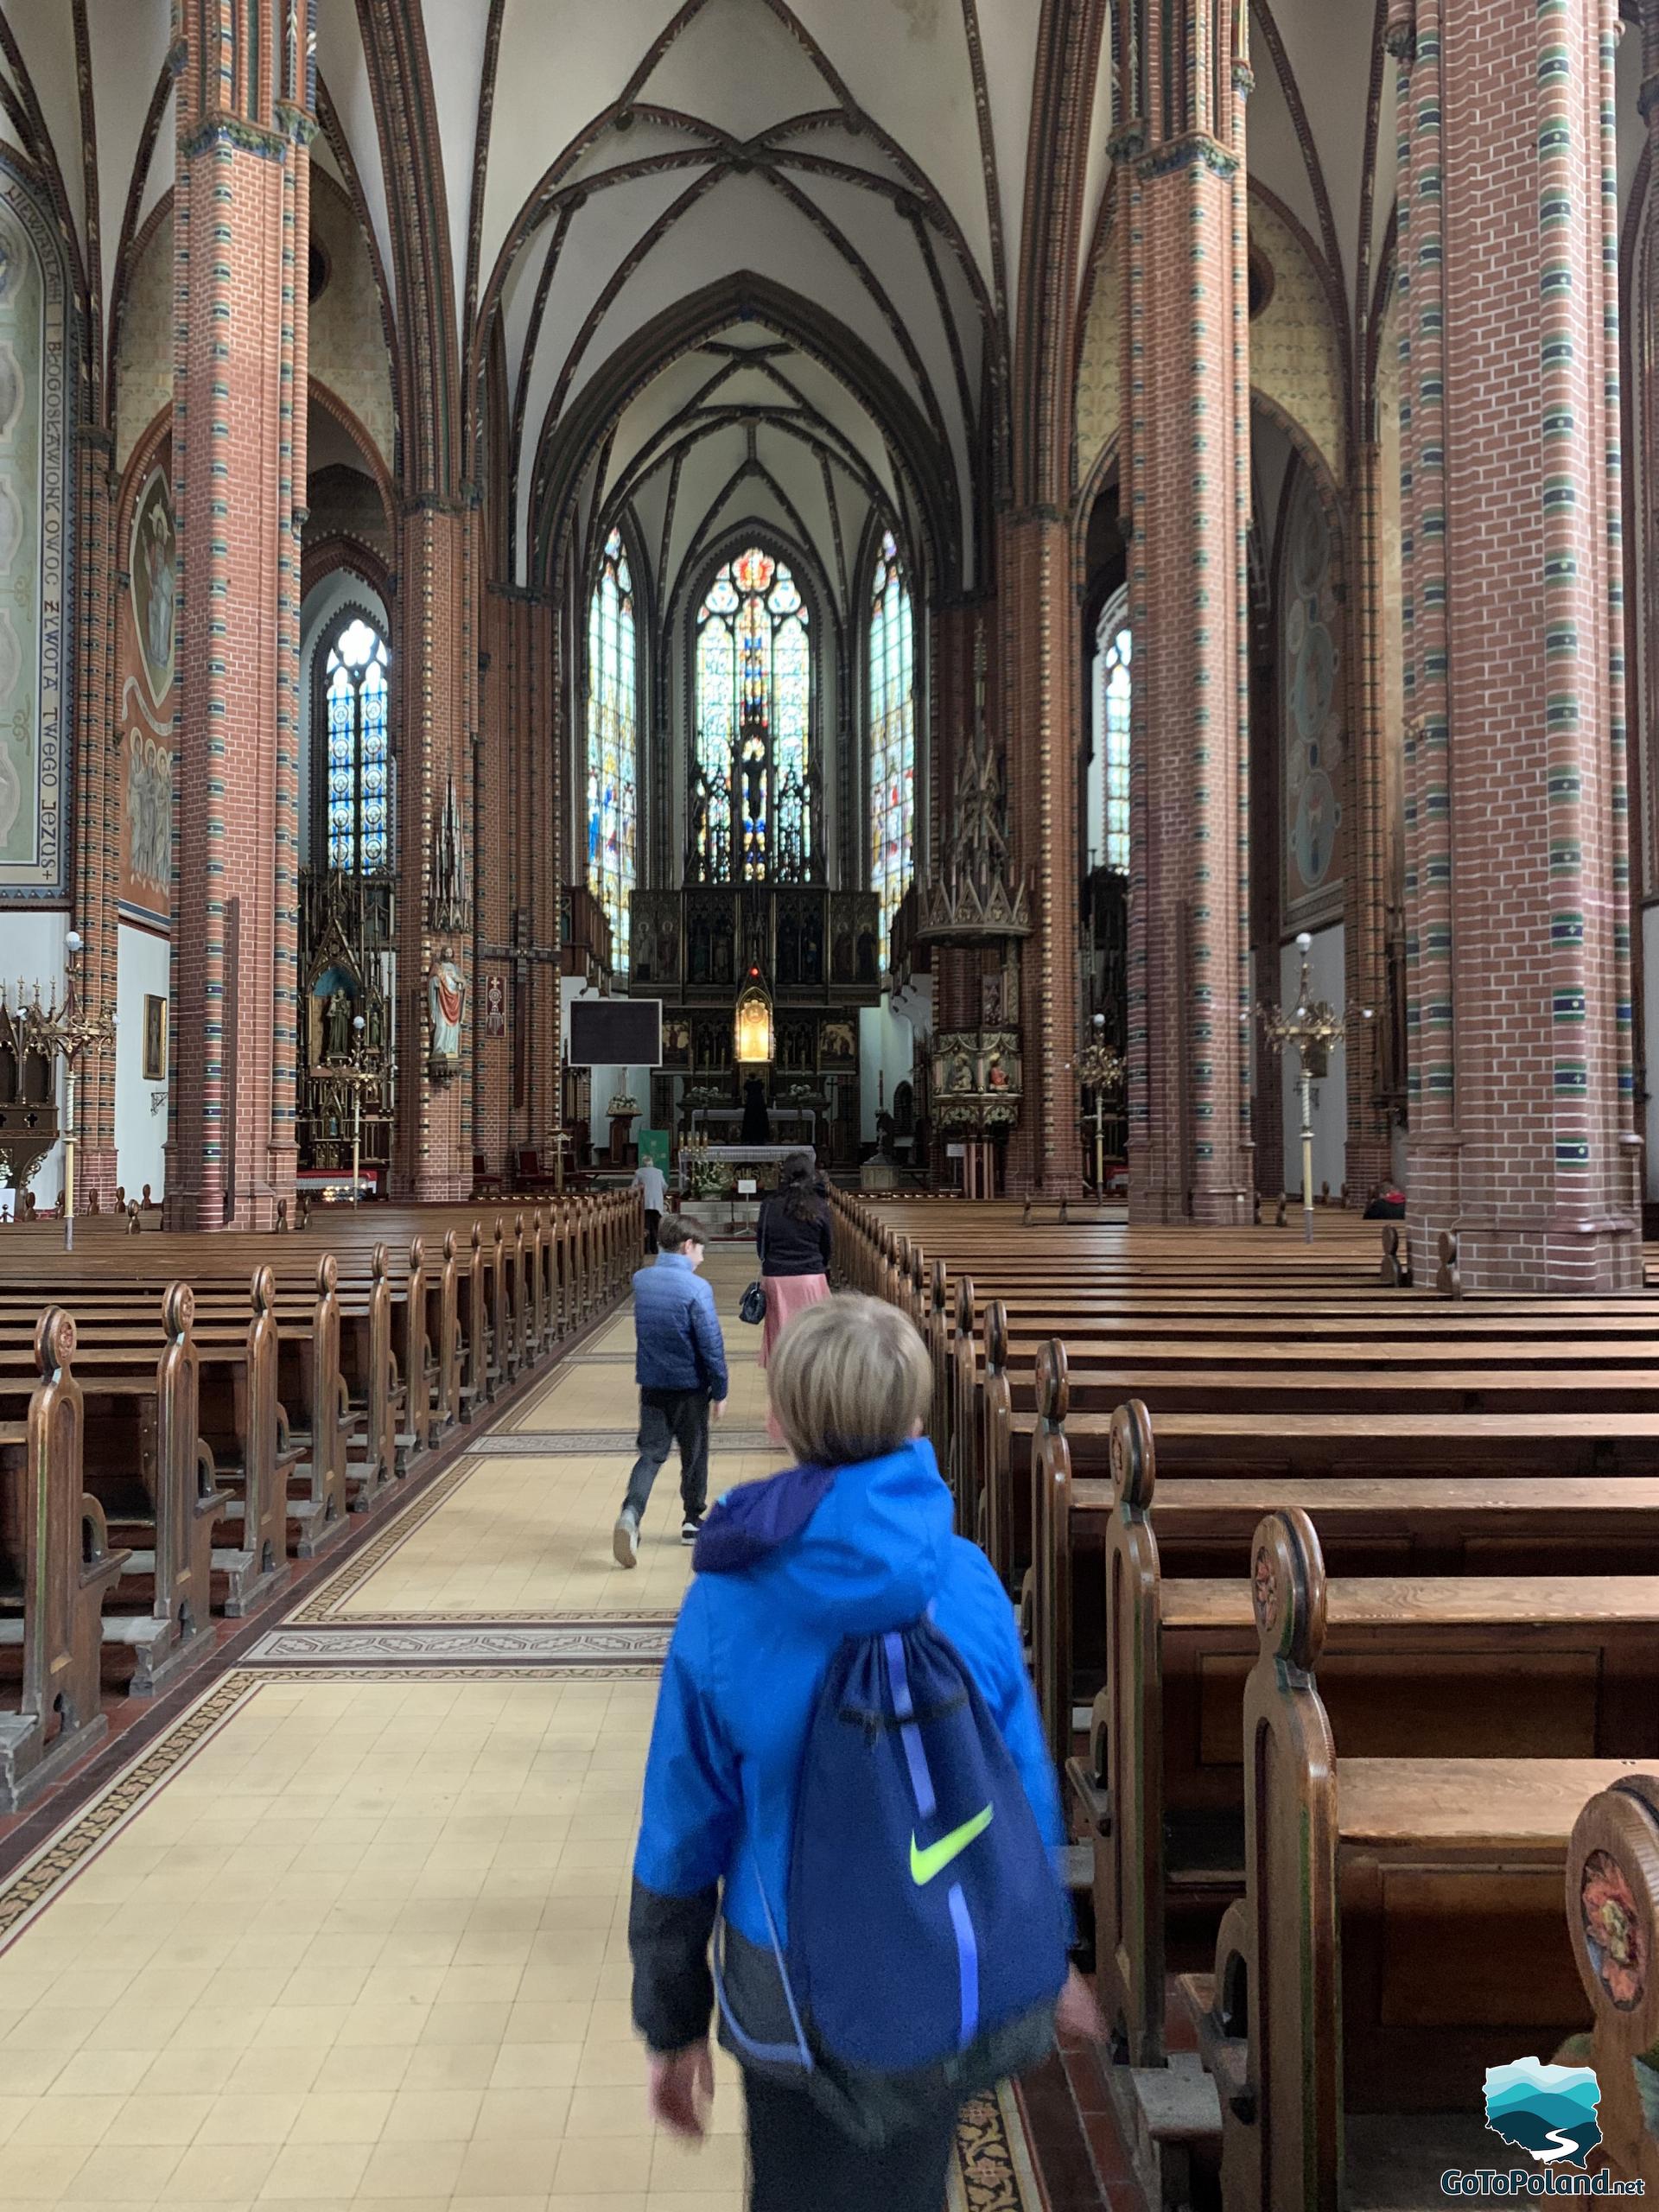 rows of pews in the church, very high brick pillars, altar in the background 